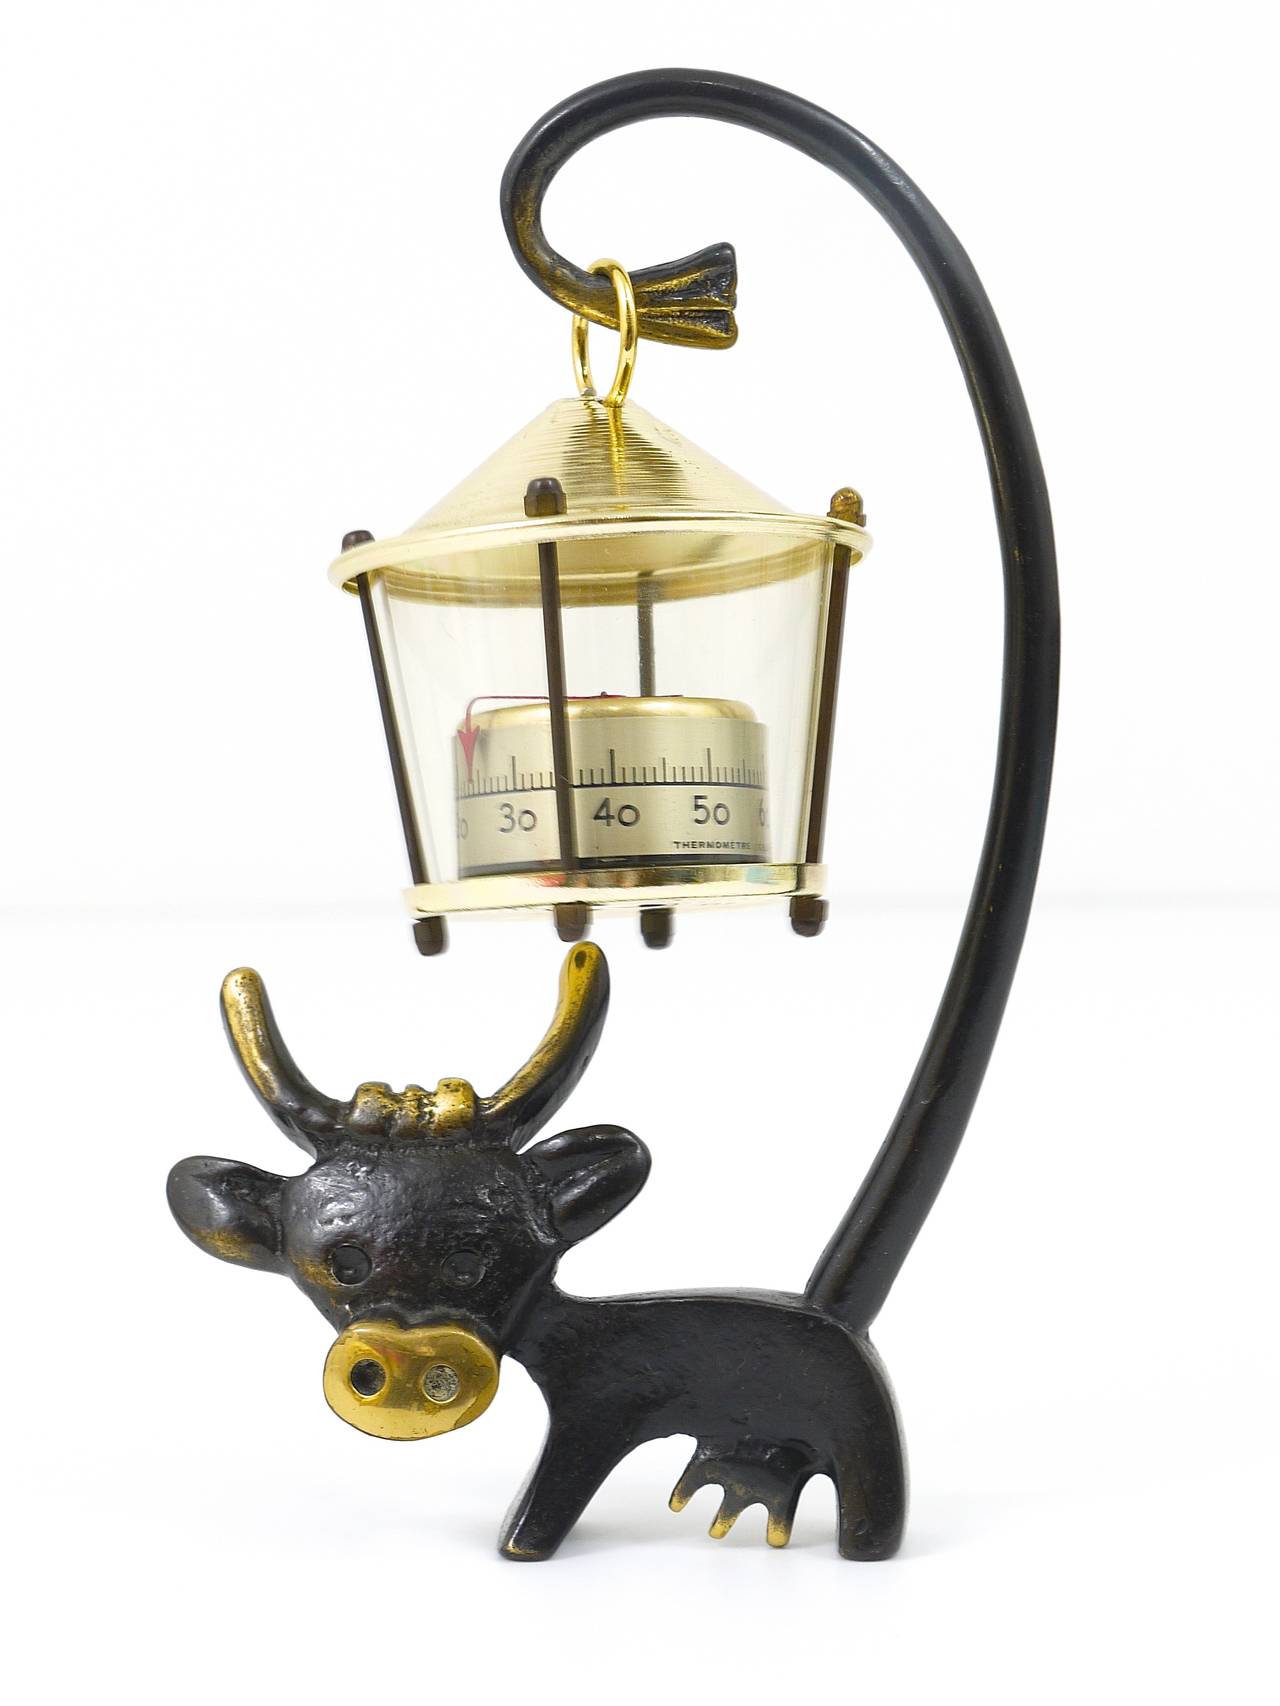 A charming sculptural Austrian midcentury desk thermometer, displaying a cow with a lantern-shaped thermometer. A humorous design by Walter Bosse, executed by Hertha Baller Austria in the 1950s. Made of brass, in excellent condition.